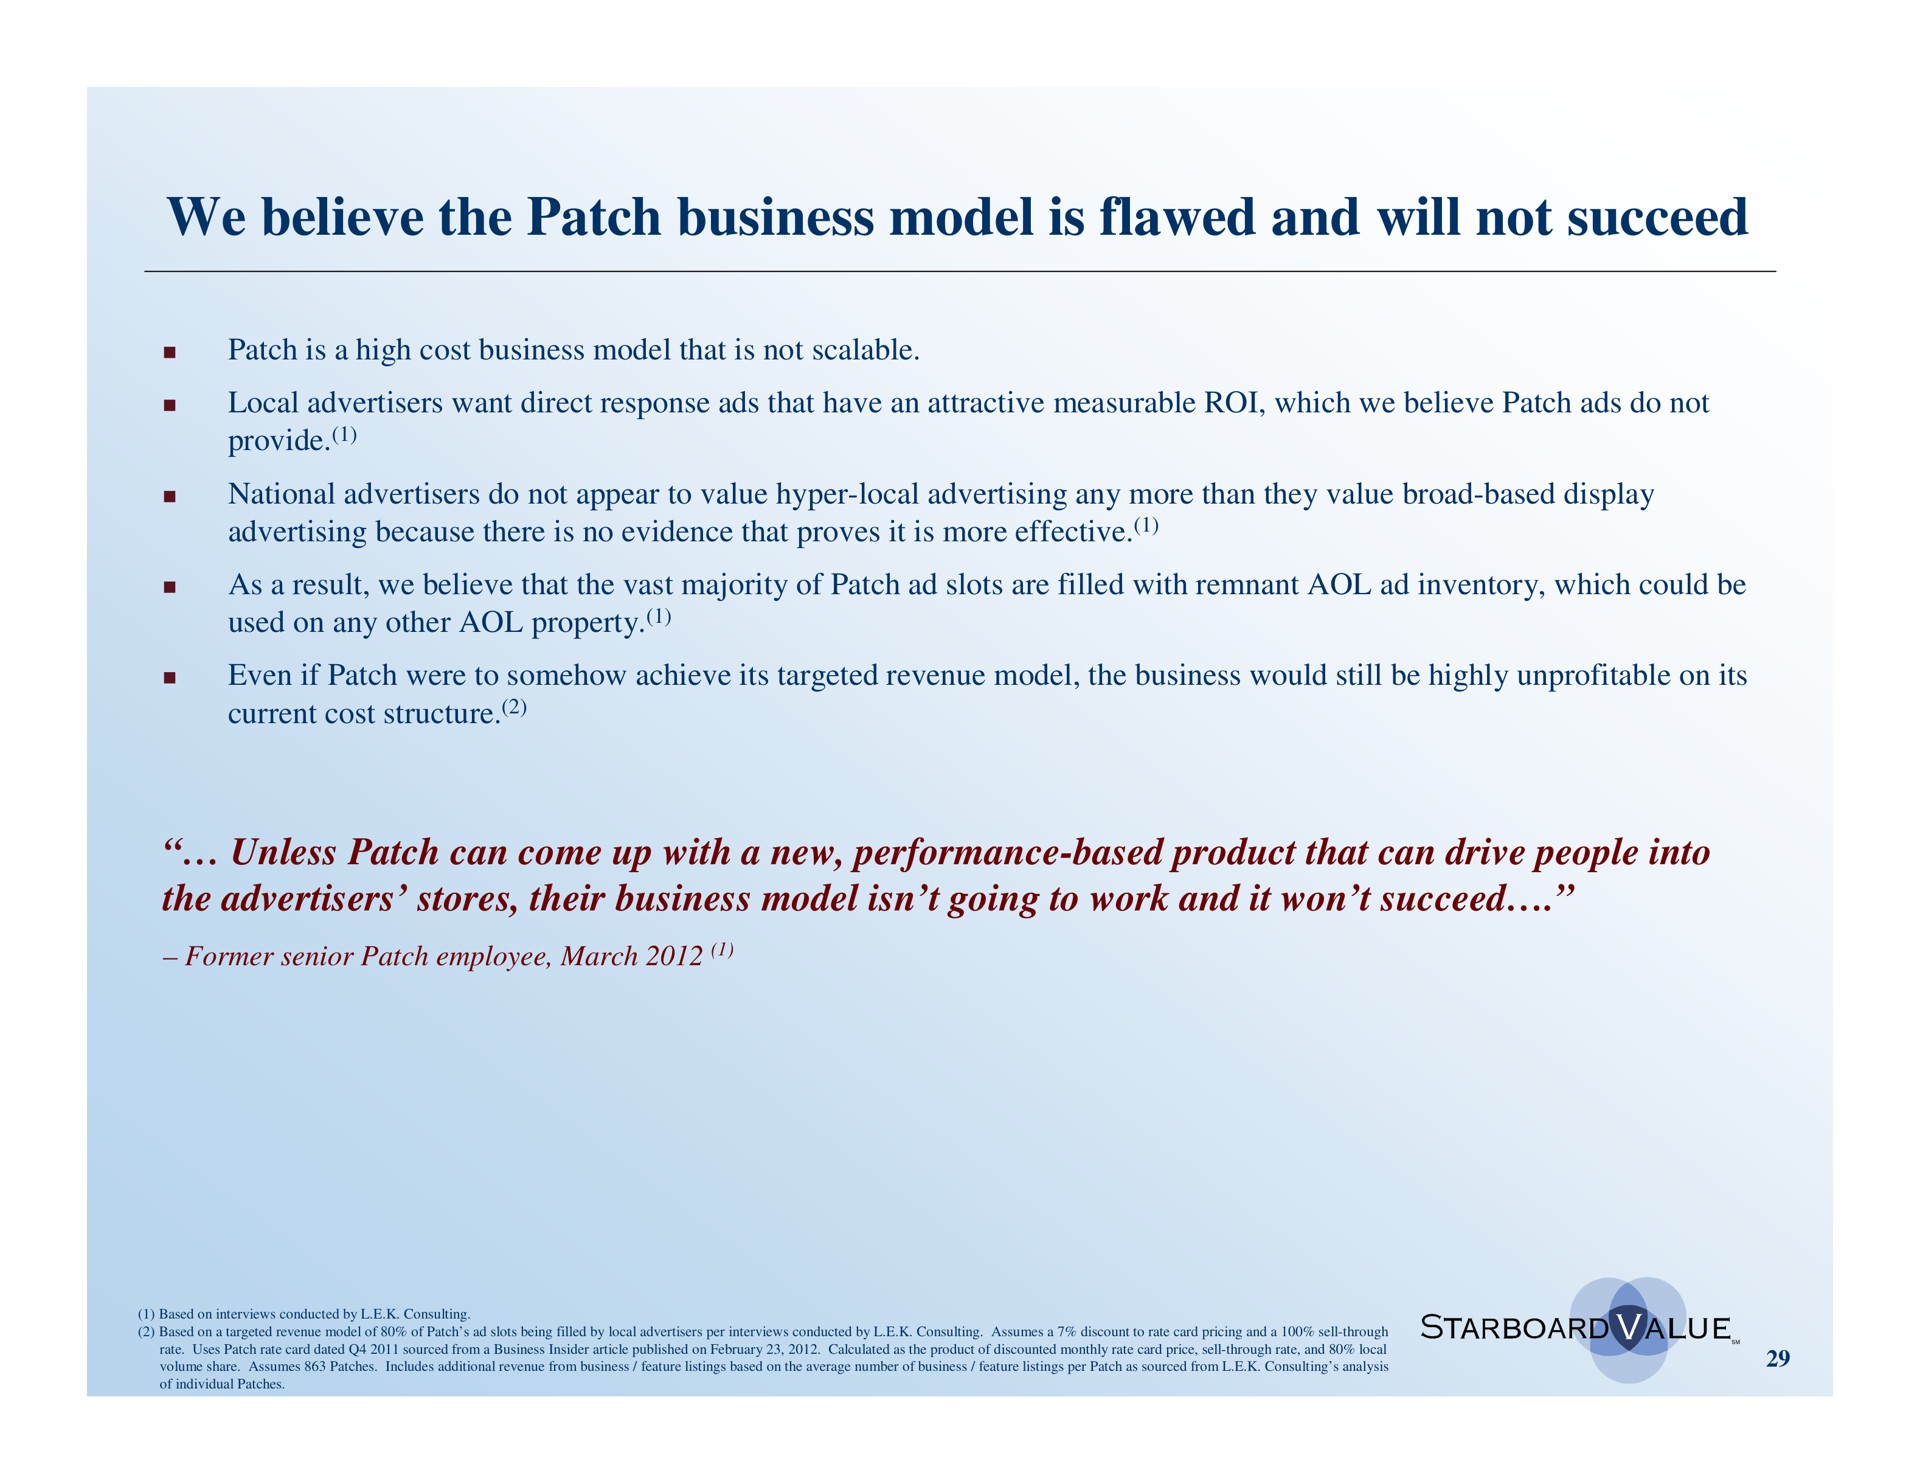 we believe the patch business model is flawed and will not succeed | Starboard Value